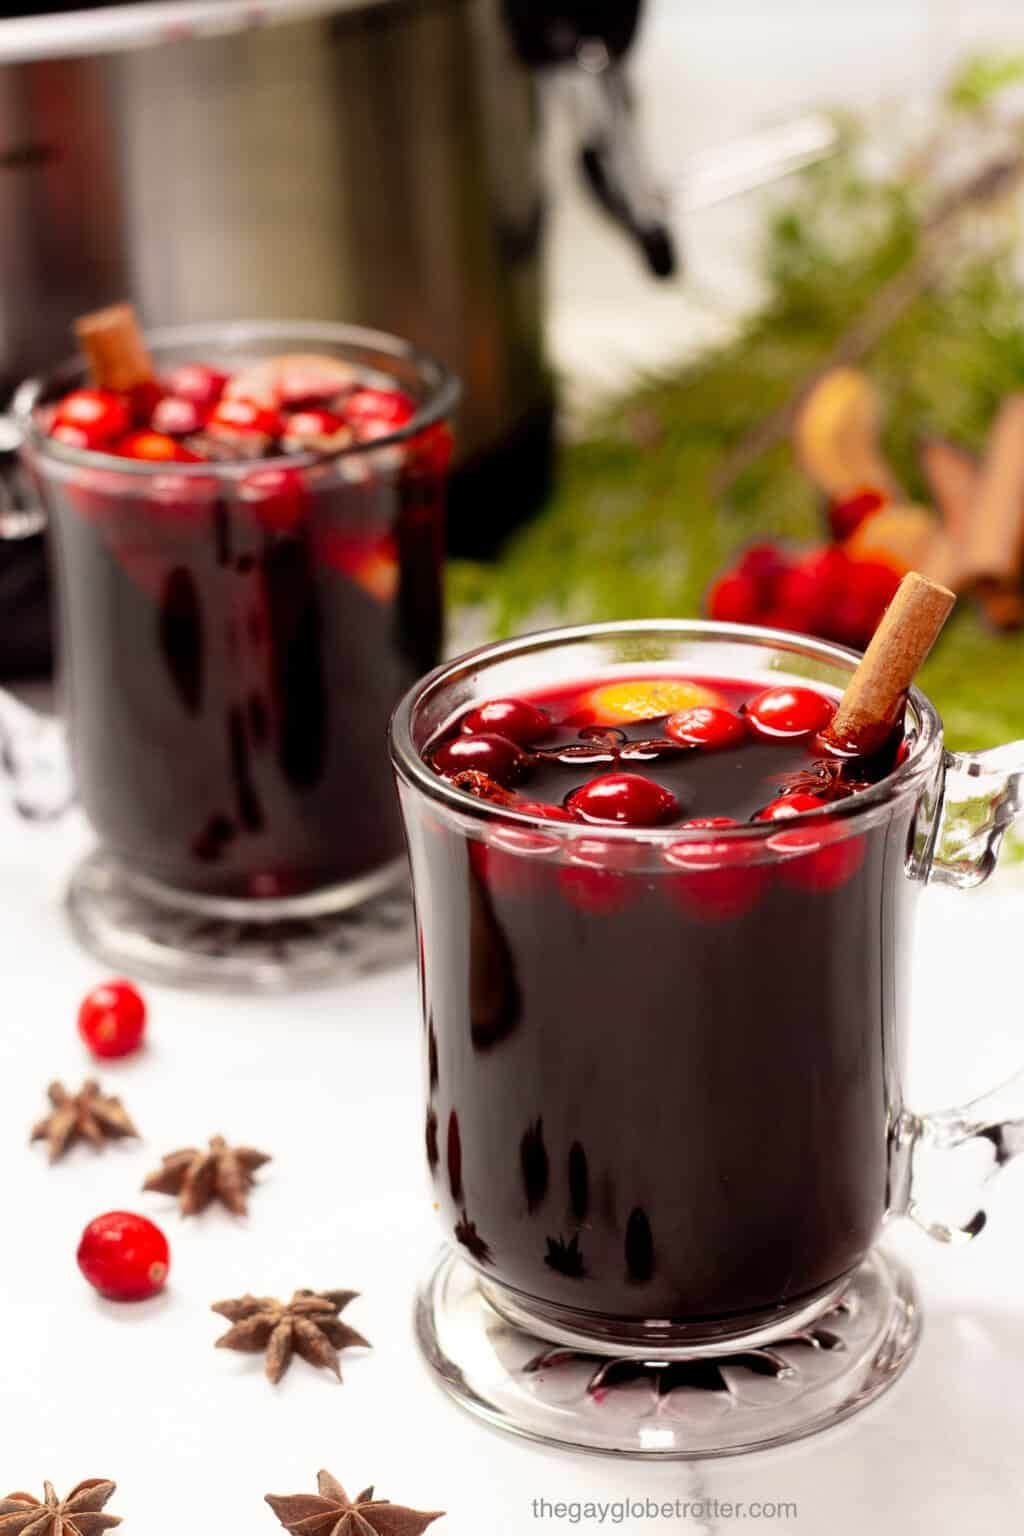 Two glasses of mulled wine with cherries and cinnamon stick garnish.